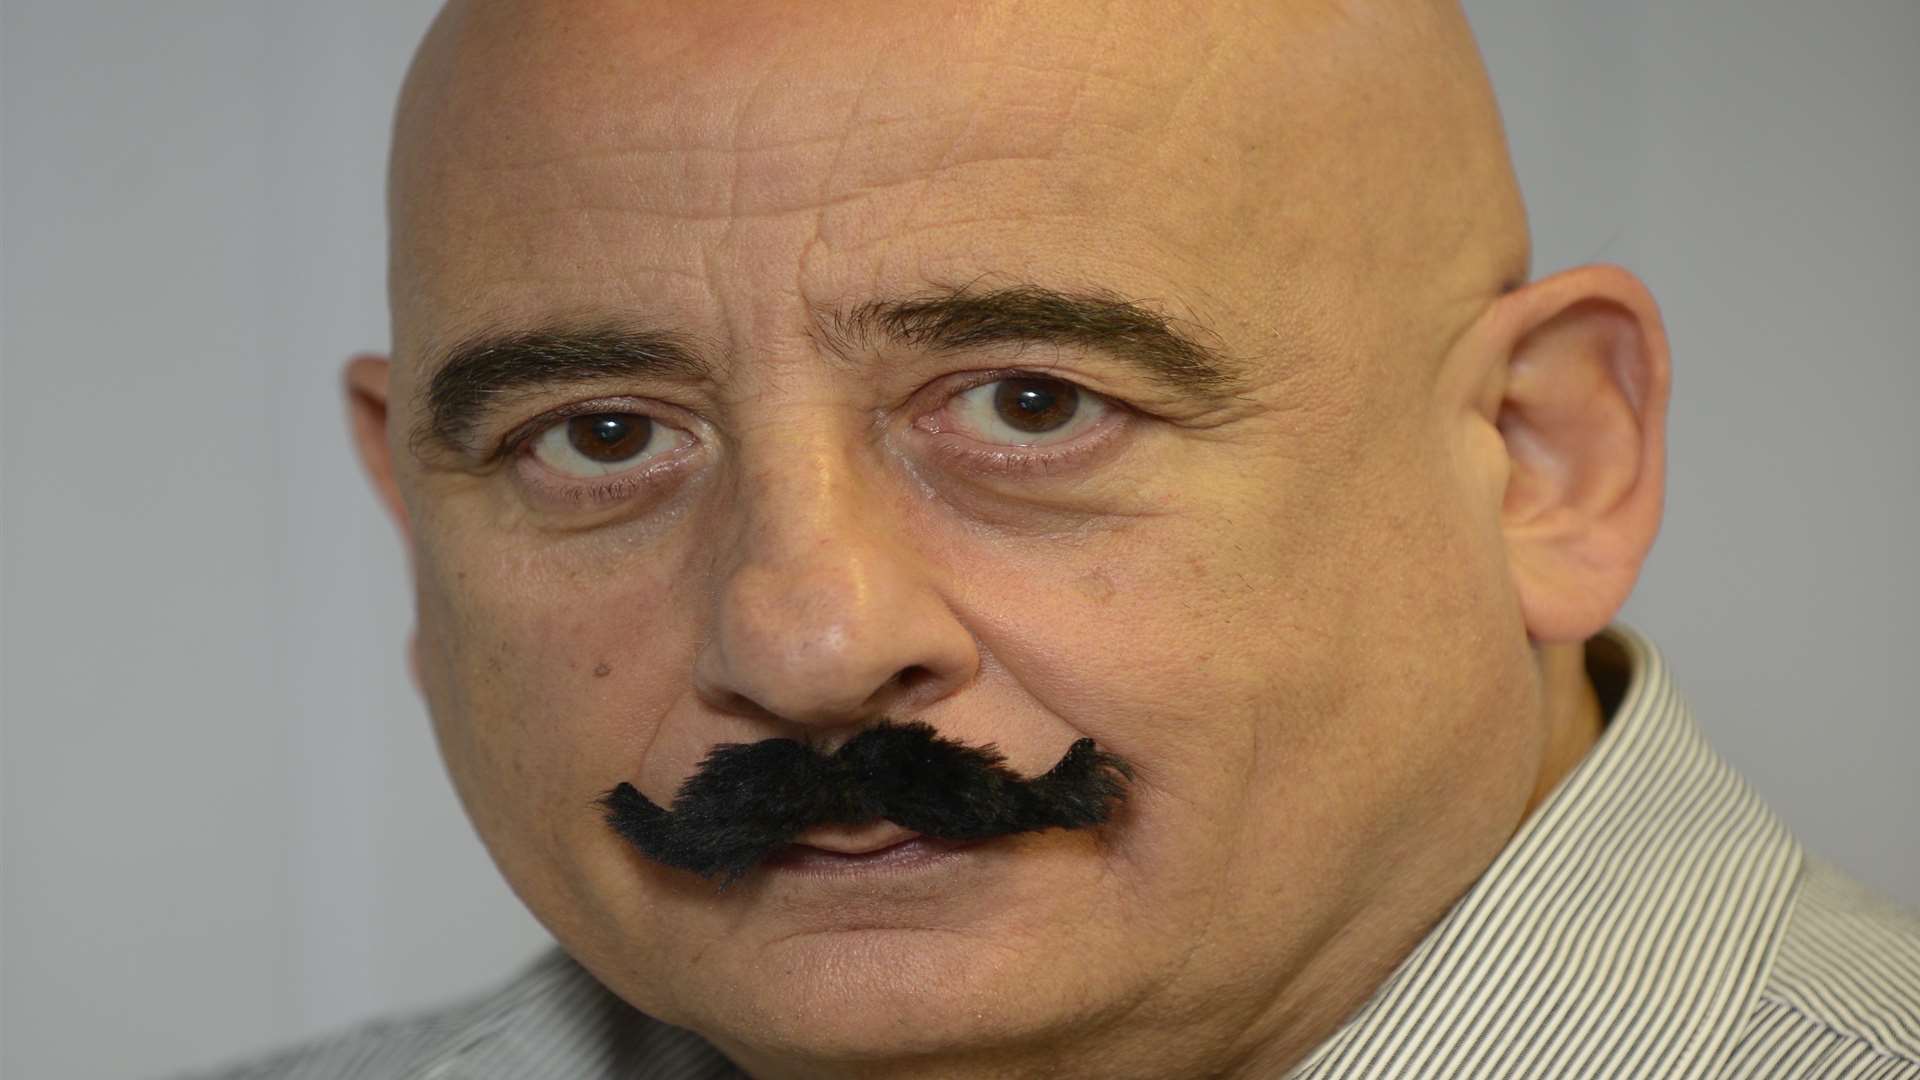 KM reporter Nick Lillitos sported the Hercule Poirot look with this fake tache